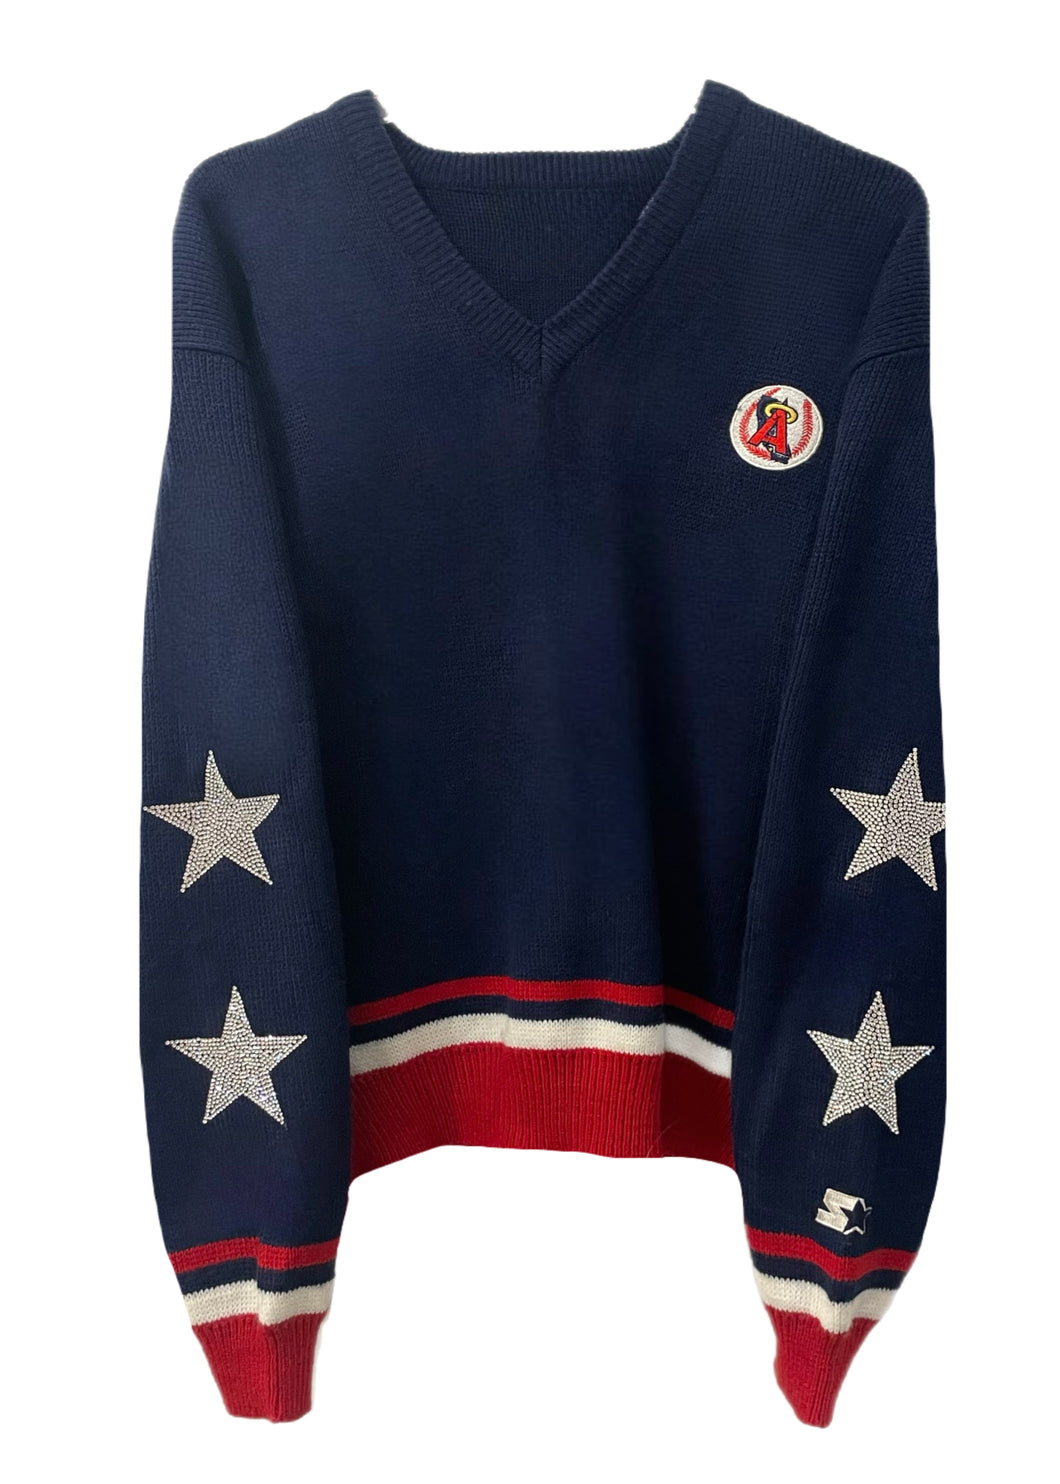 Los Angeles Angels, MLB One of a KIND Vintage Knit Sweater with Crystal Star Design